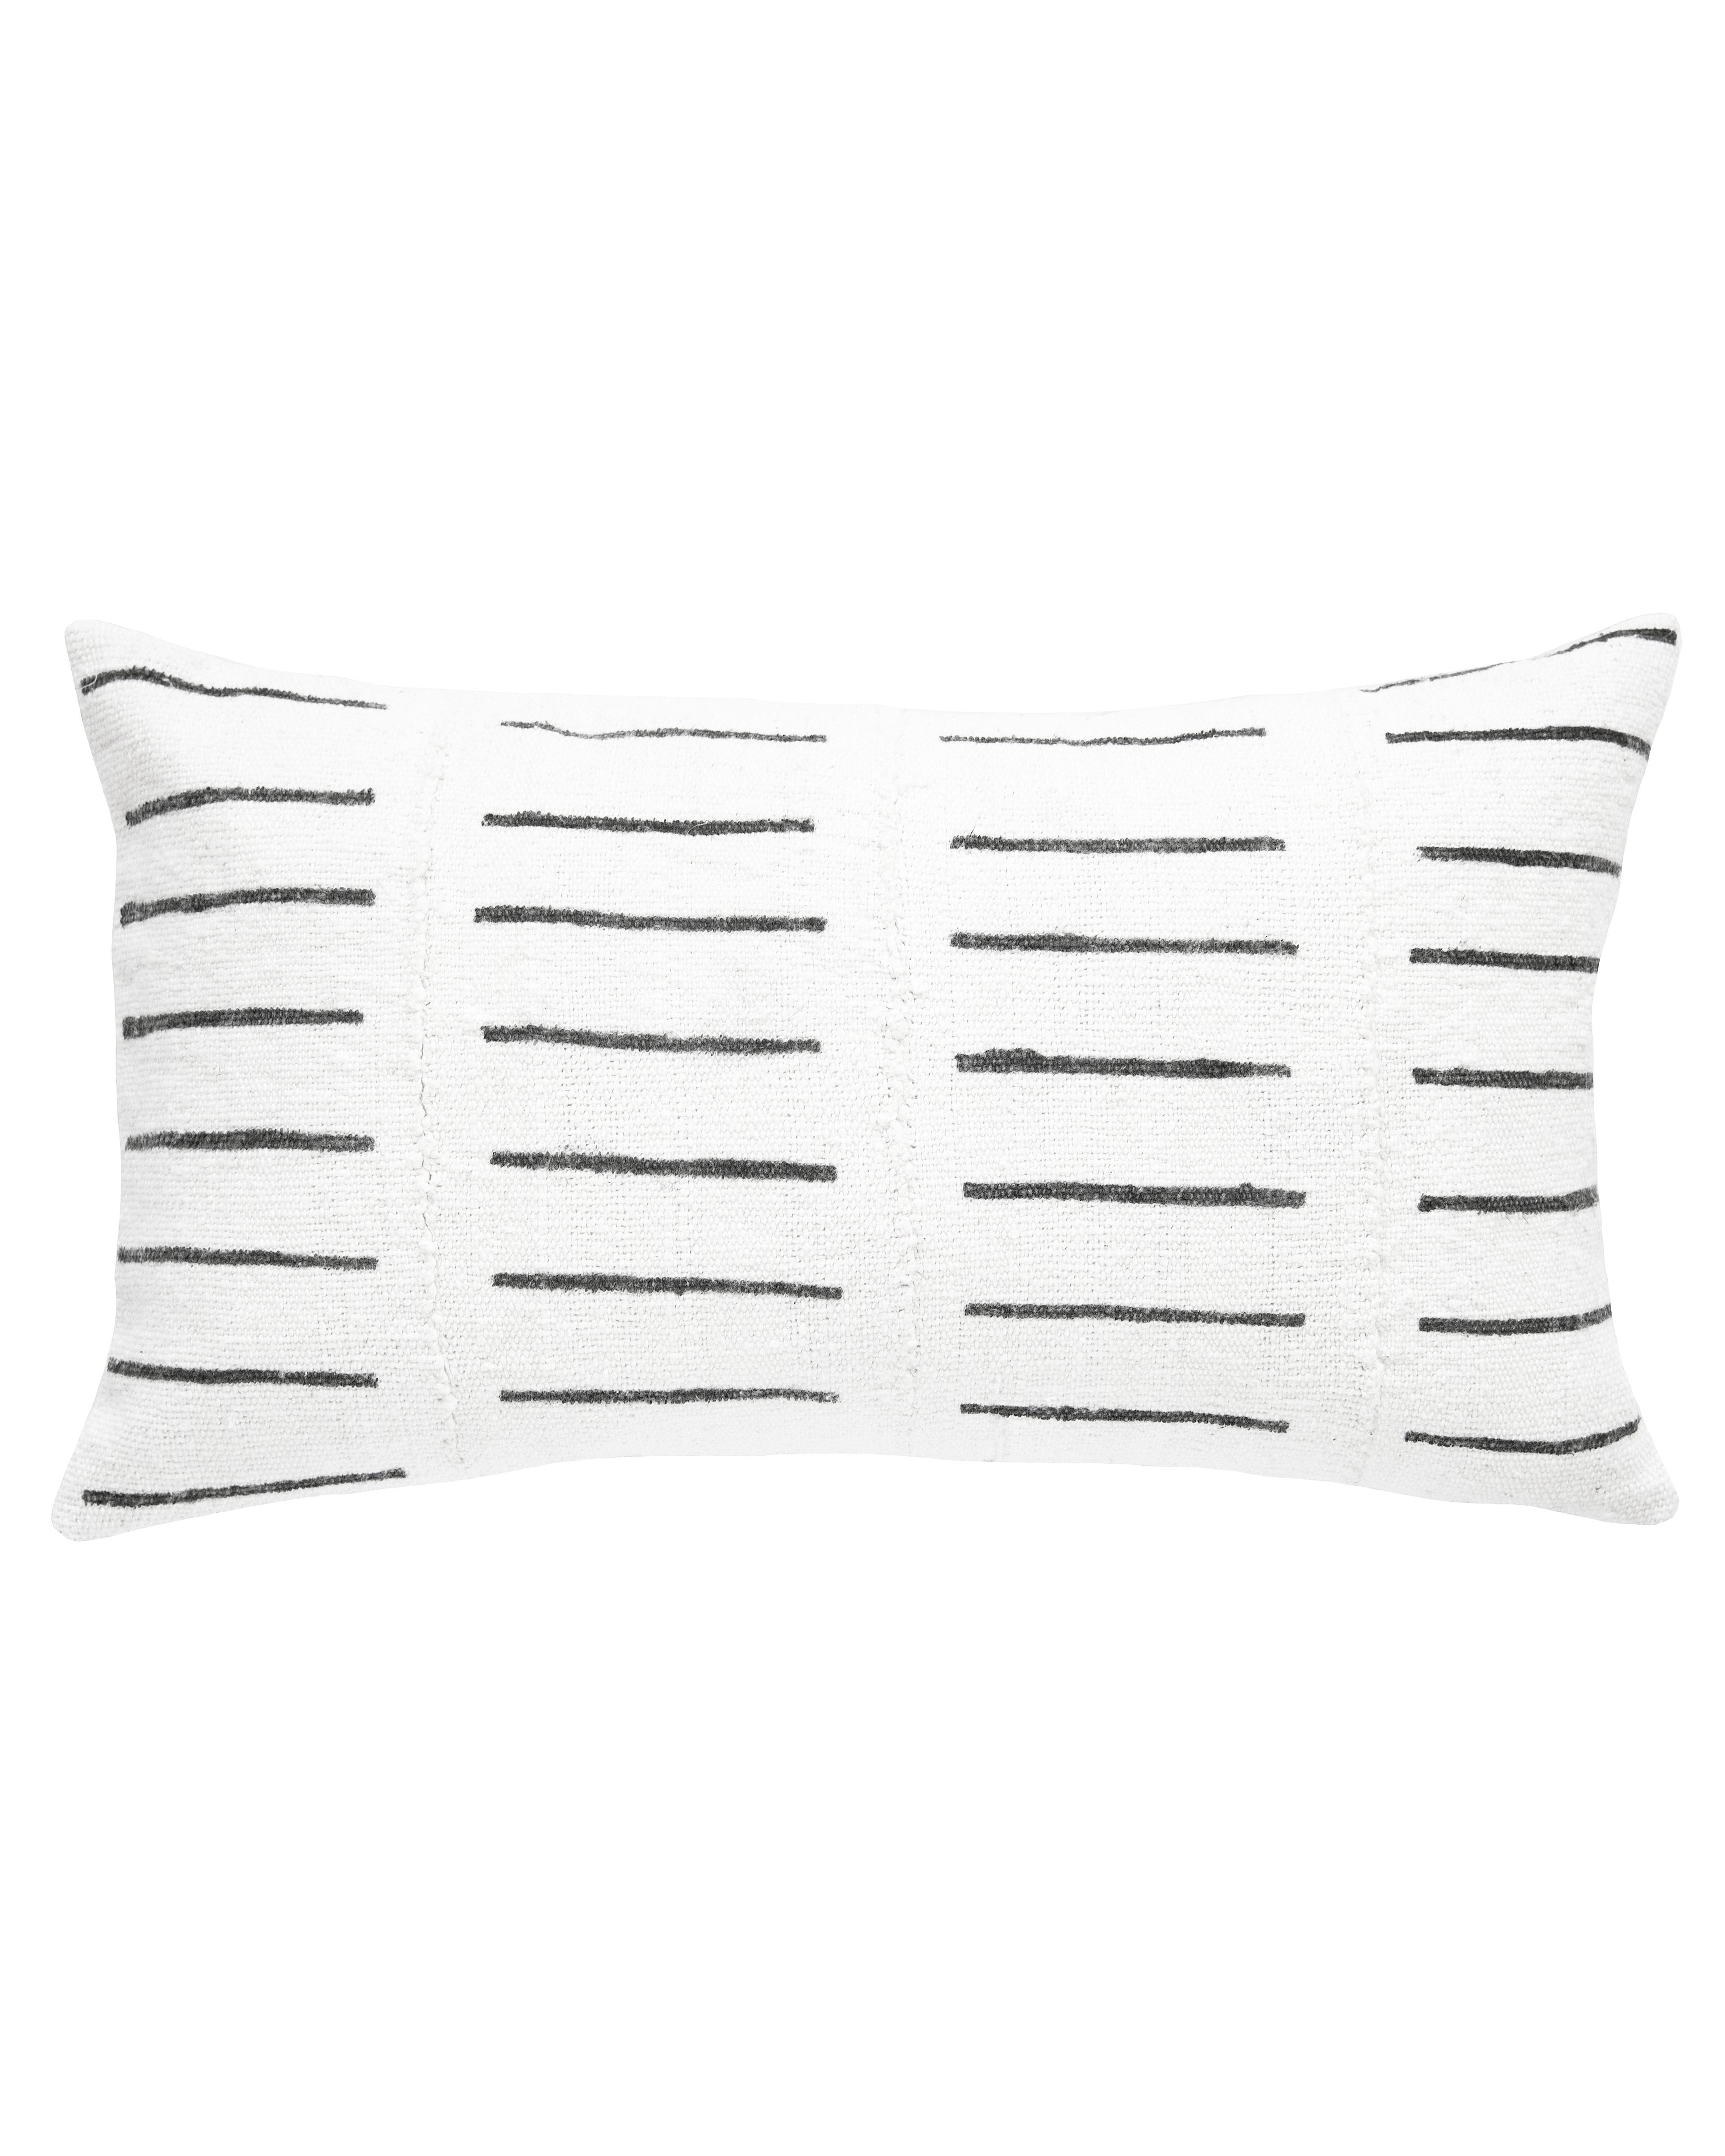 dash mud cloth lumbar pillow in white - cover only - PillowPia